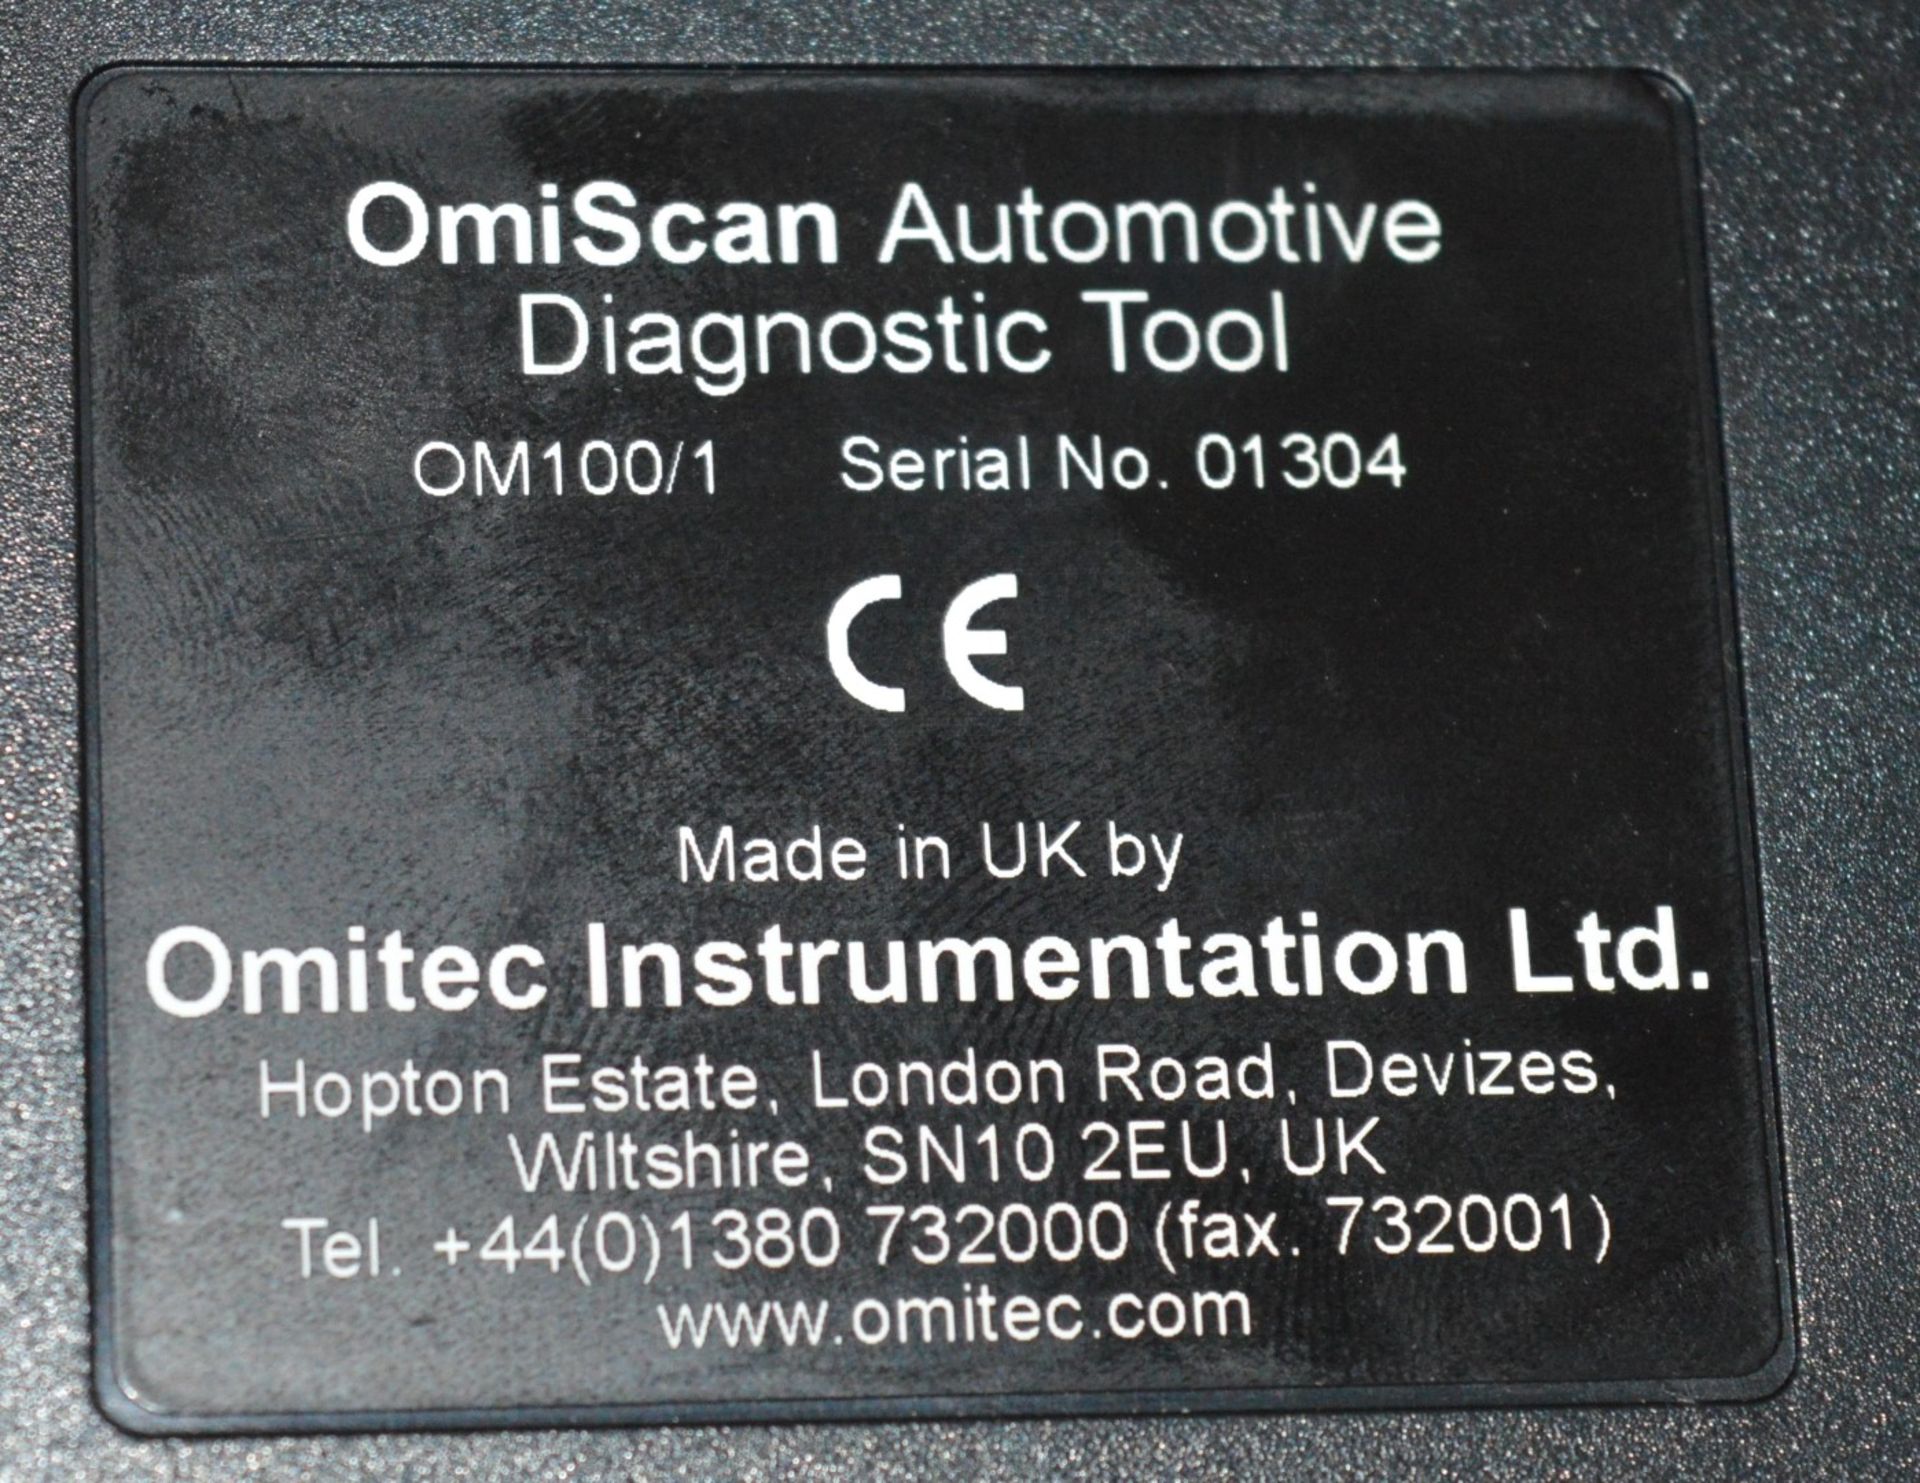 1 x Omitec OmiScan Automotive Diagnostic Tool - Model OM100/1 - Includes Carry Case, User Manual, - Image 4 of 7